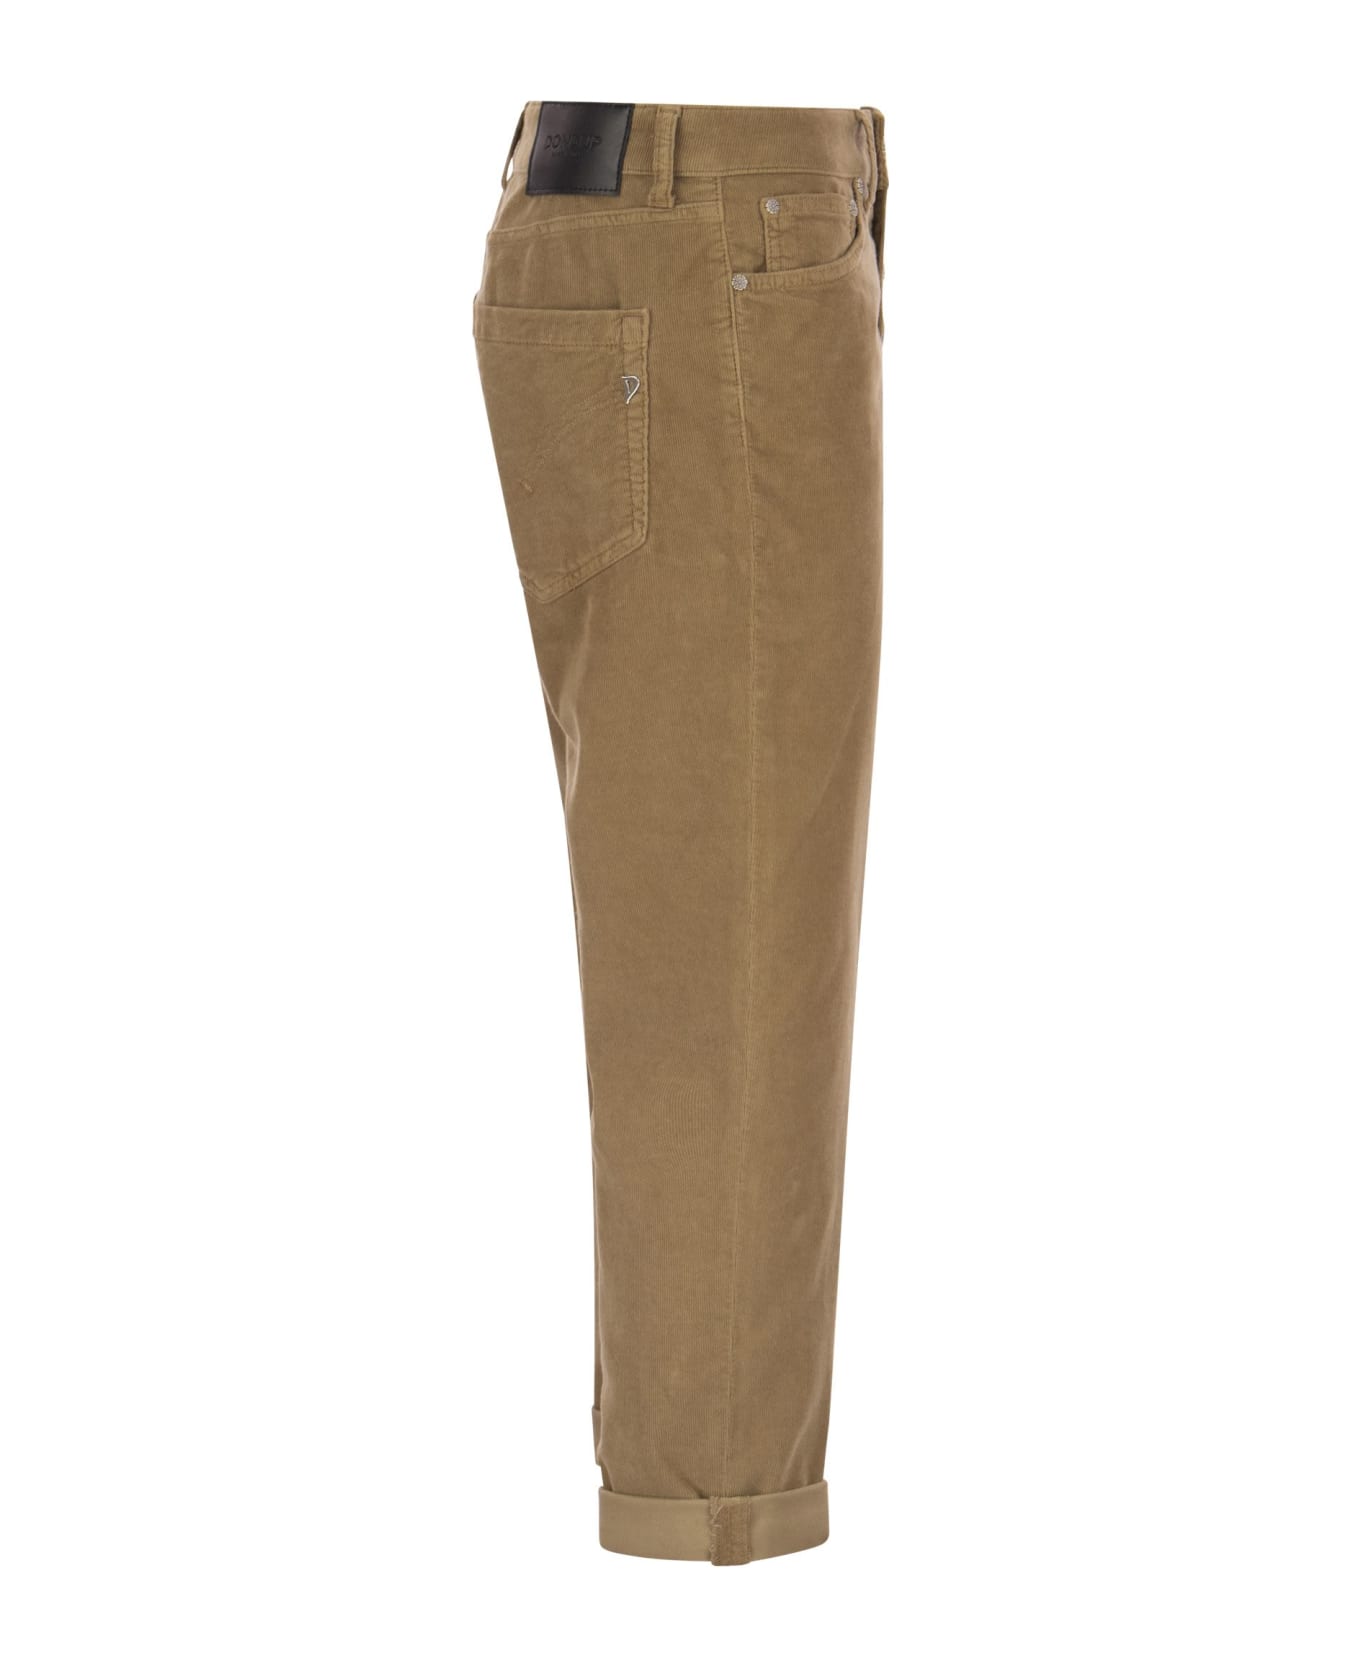 Dondup Koons - Multi-striped Velvet Trousers With Jewelled Buttons - Camel